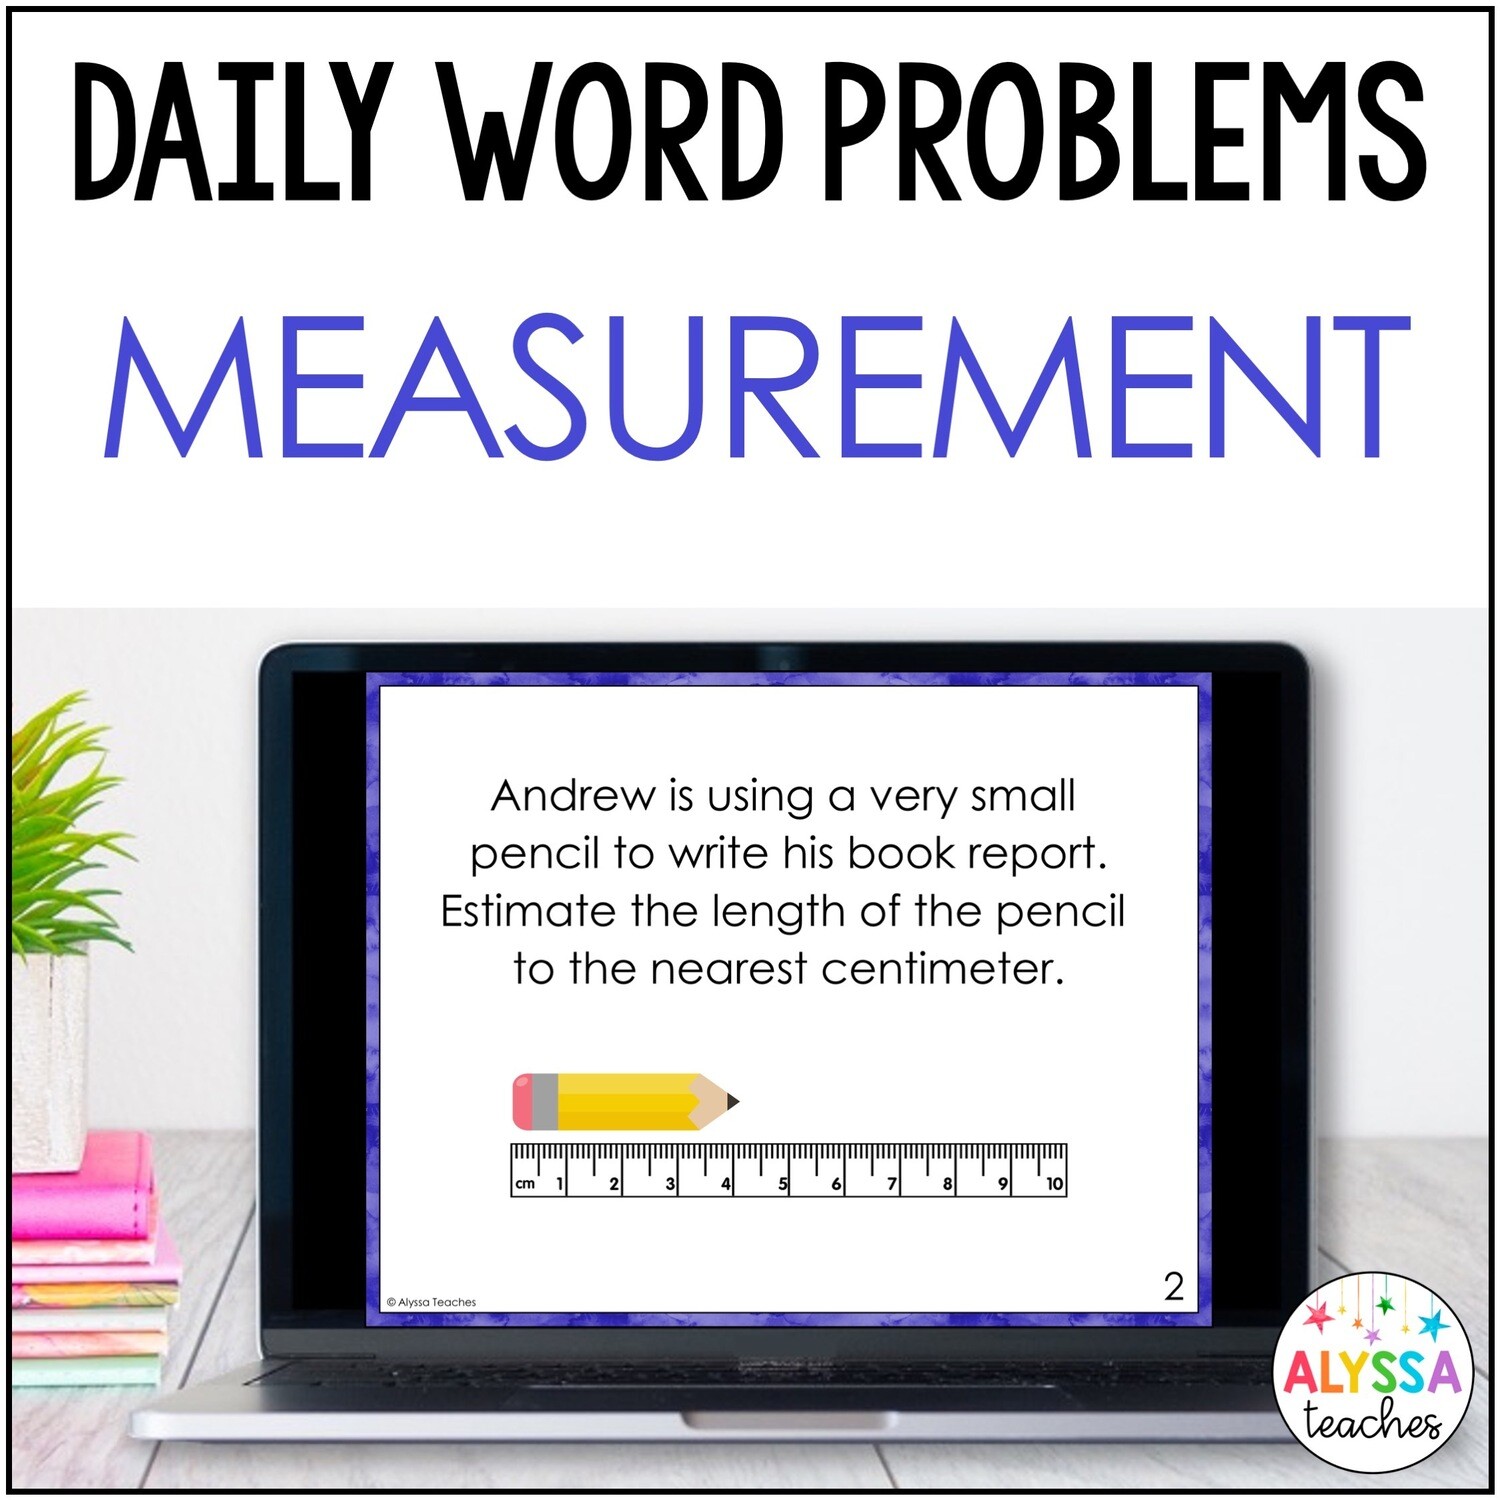 Measurement Word Problems for Daily Math Review